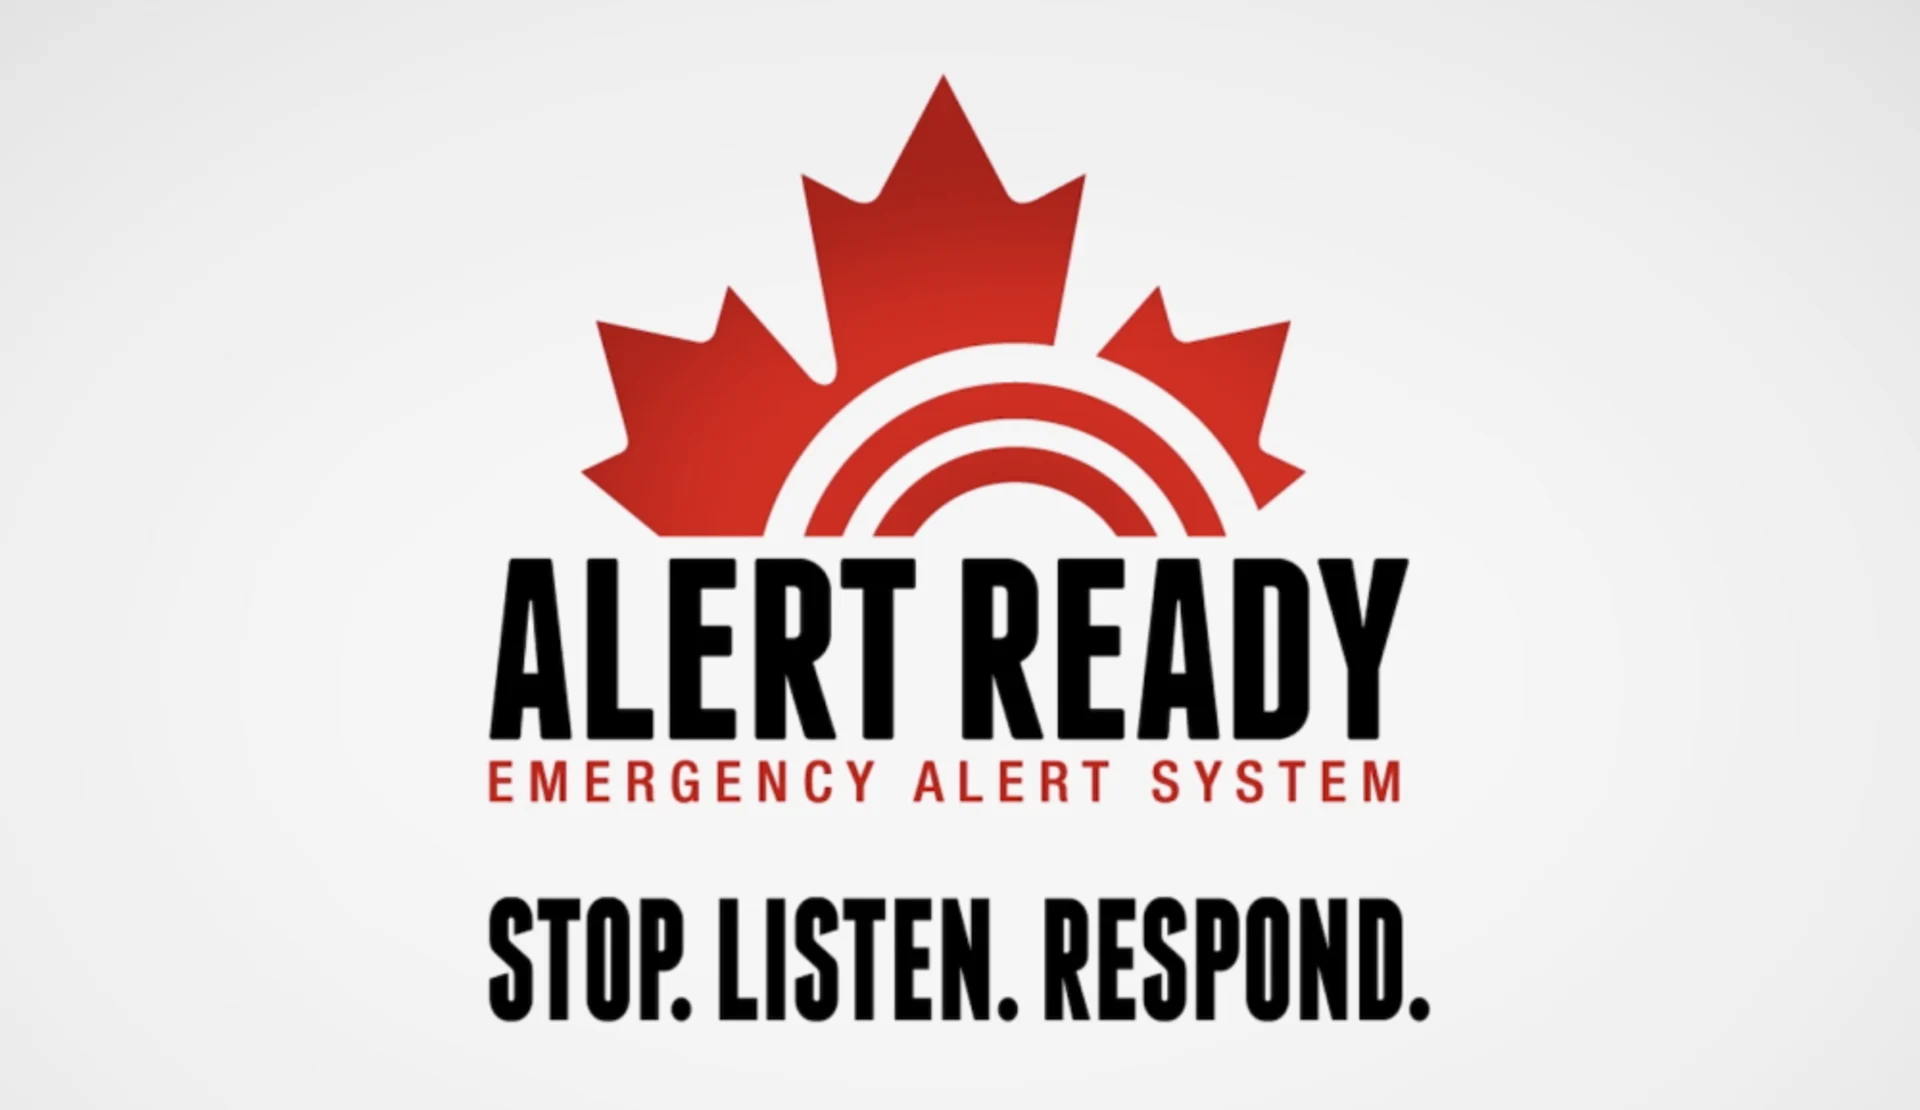 Did you receive a TEST emergency alert. No need to call 9-1-1 about this. Here's why it was issued